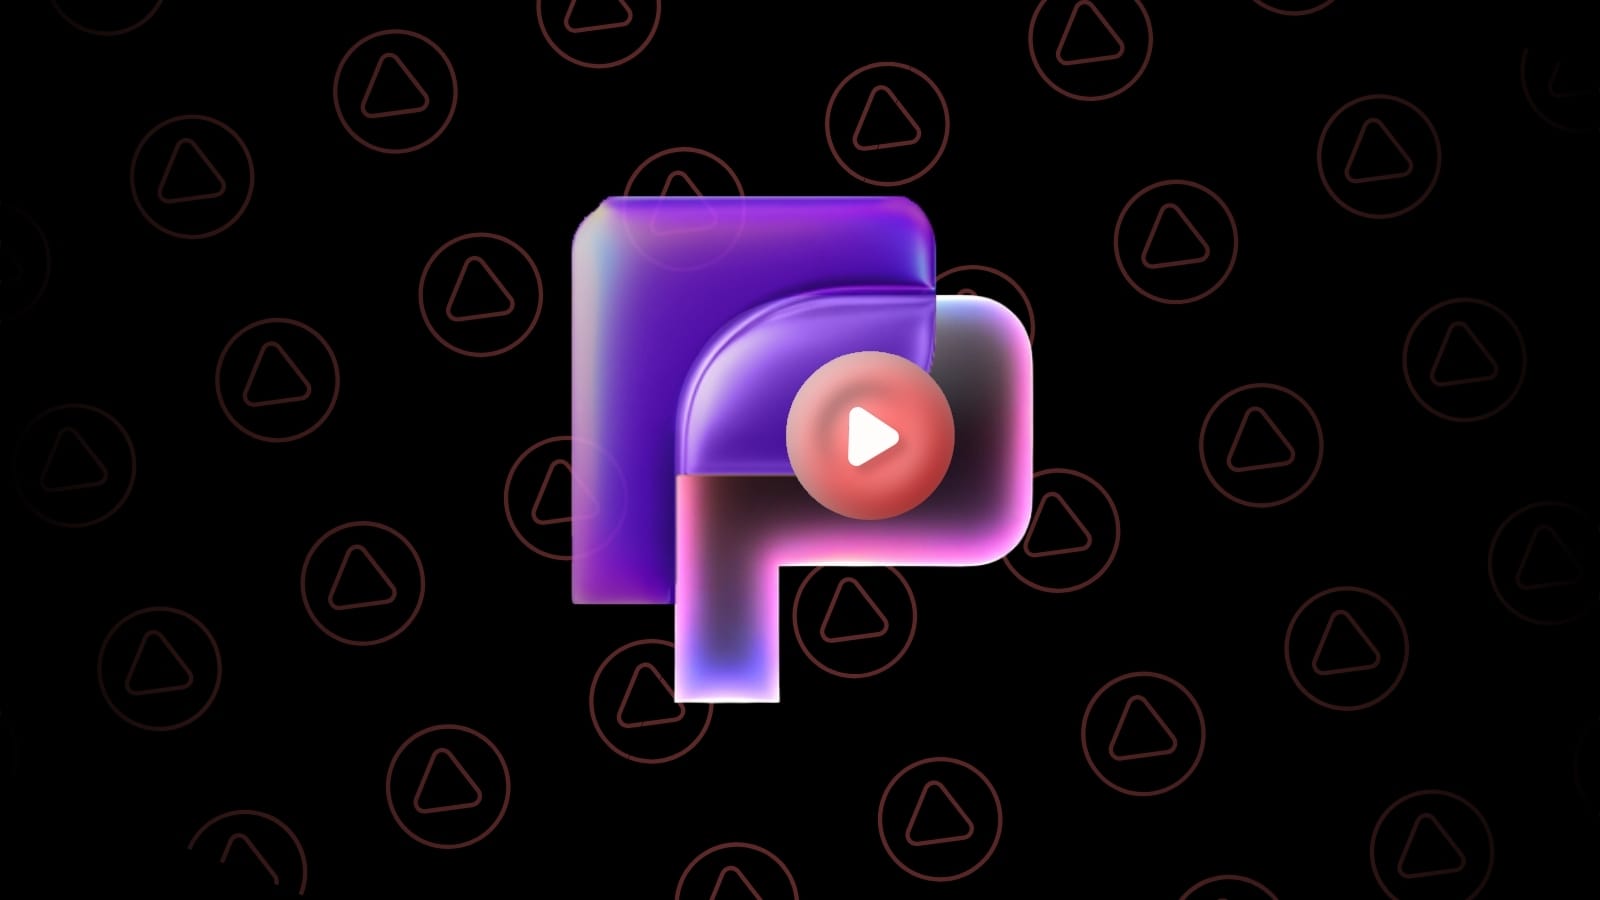 Vibrant YouTube-inspired artwork with a purple logo and red play buttons on a black backdrop.